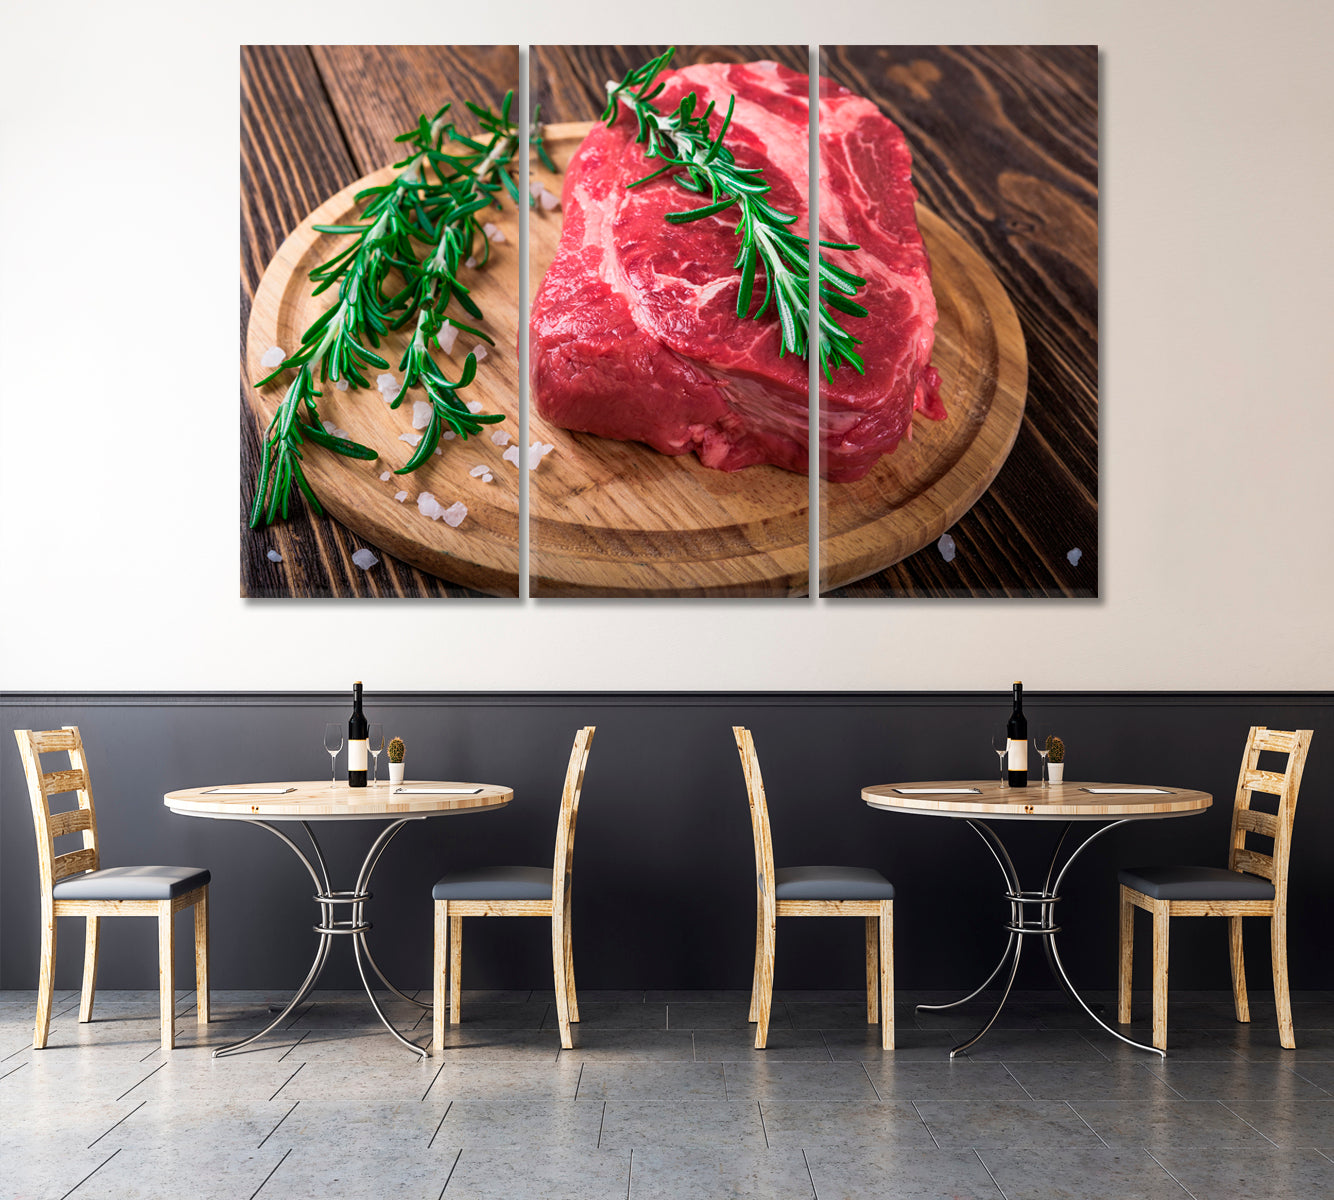 Raw Beef Steak with Rosemary Canvas Print-Canvas Print-CetArt-1 Panel-24x16 inches-CetArt